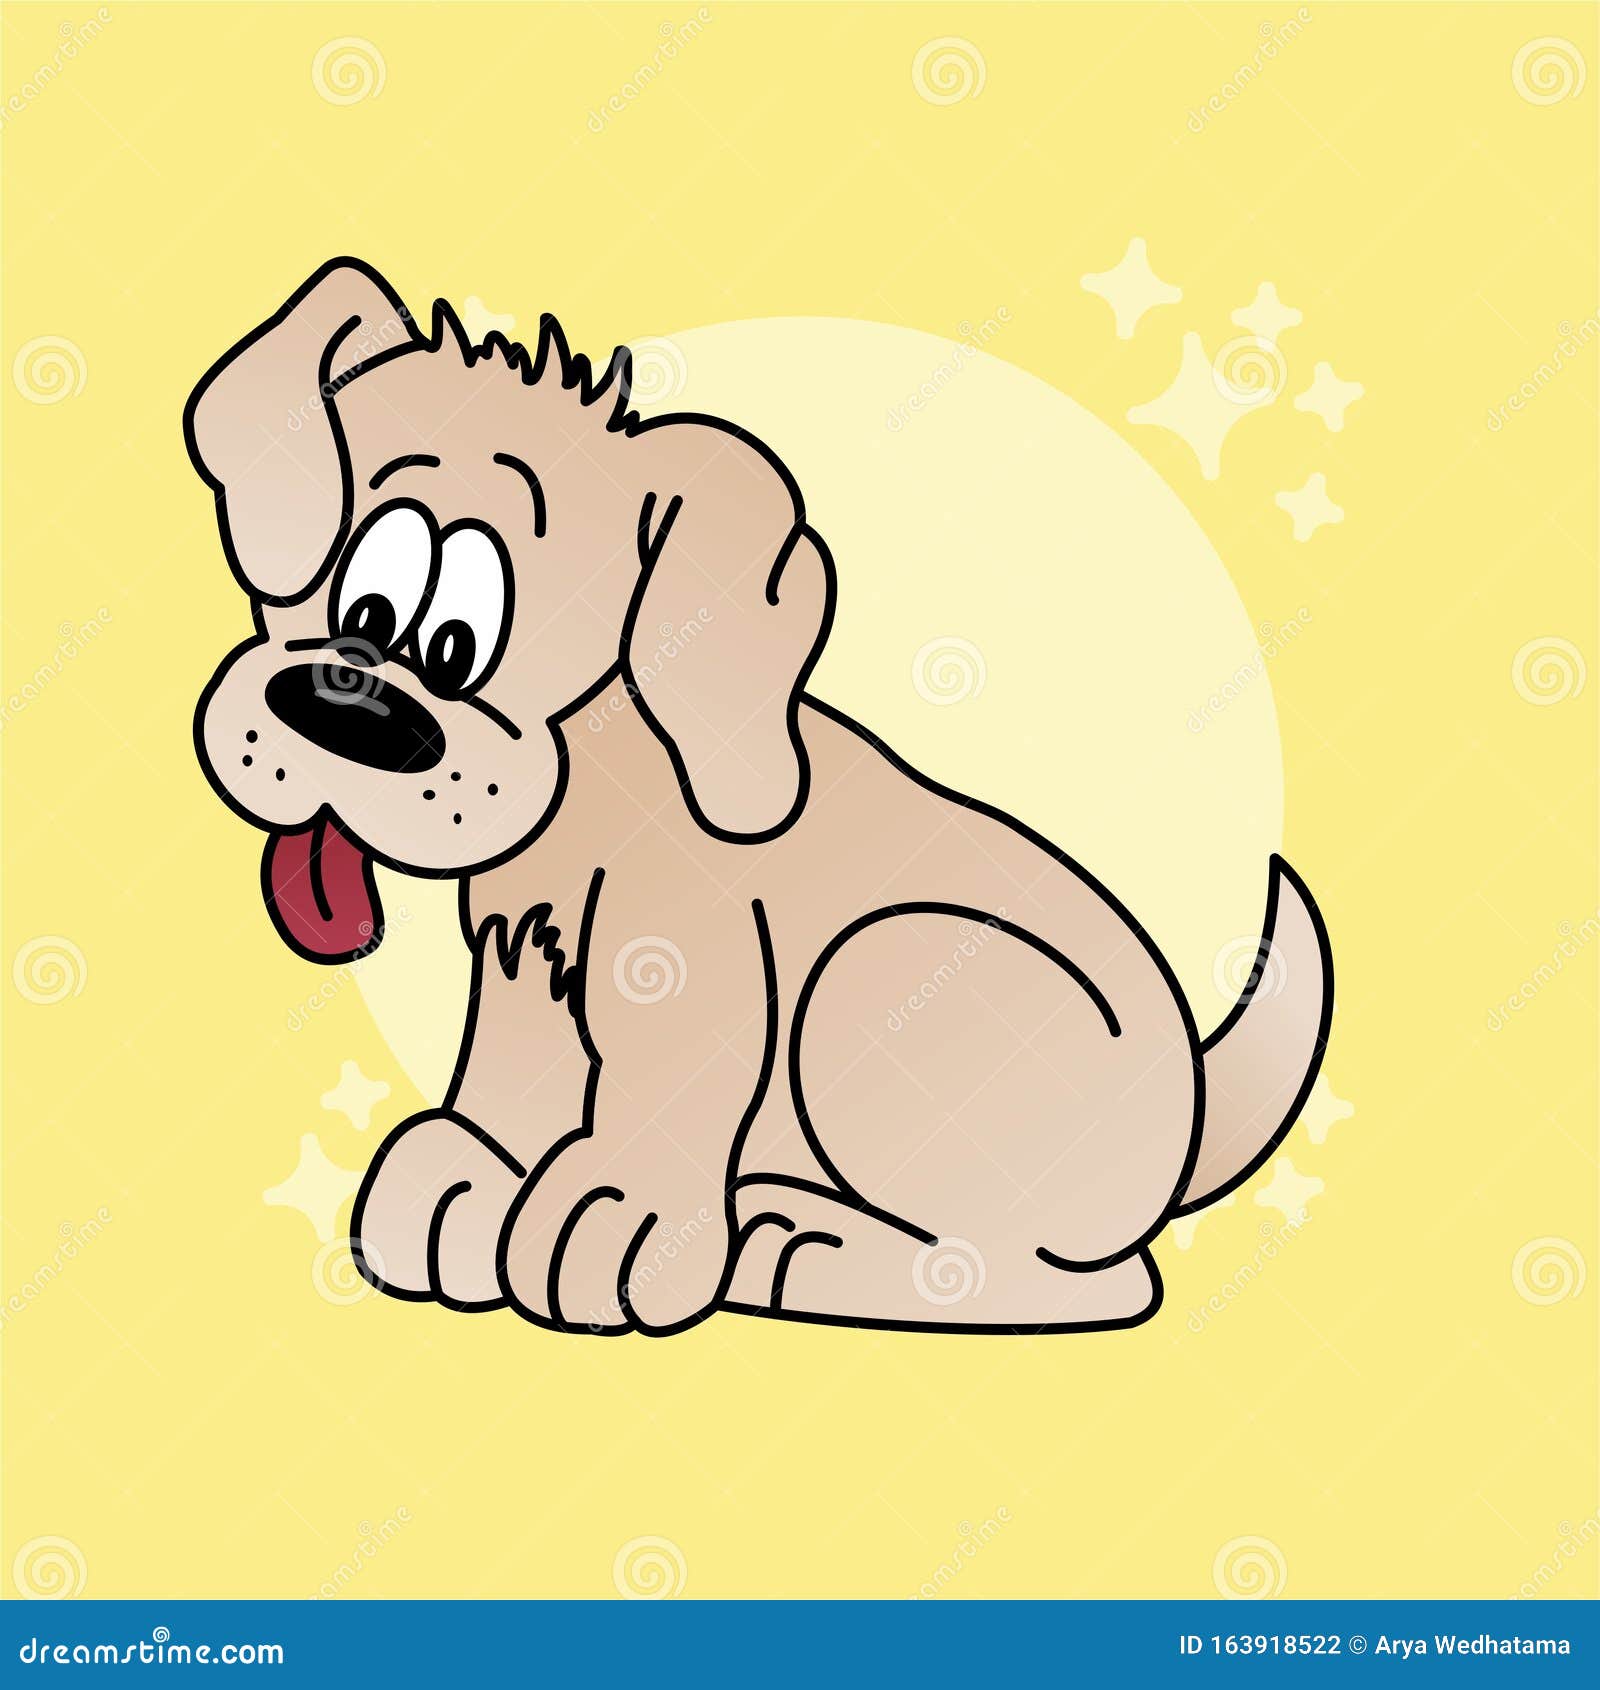 Illustration of Dog Sticking Out the Tongue Cartoon, Cute Funny Character,  Flat Design Stock Illustration - Illustration of hope, icon: 163918522